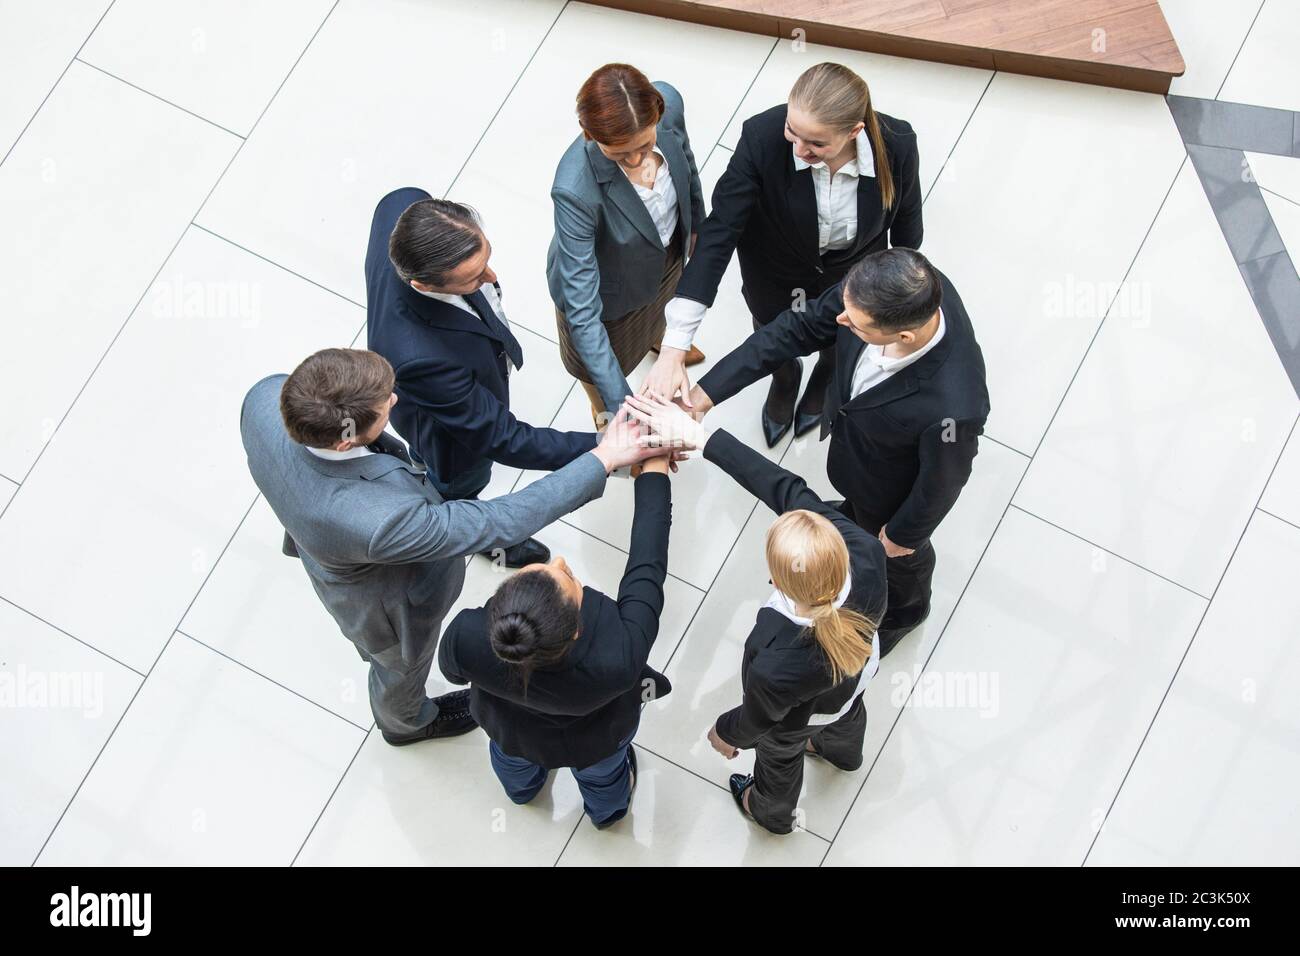 Business teamwork concept, coworkers putting hands together in a tower stacking hands unity cooperation concept, top view Stock Photo